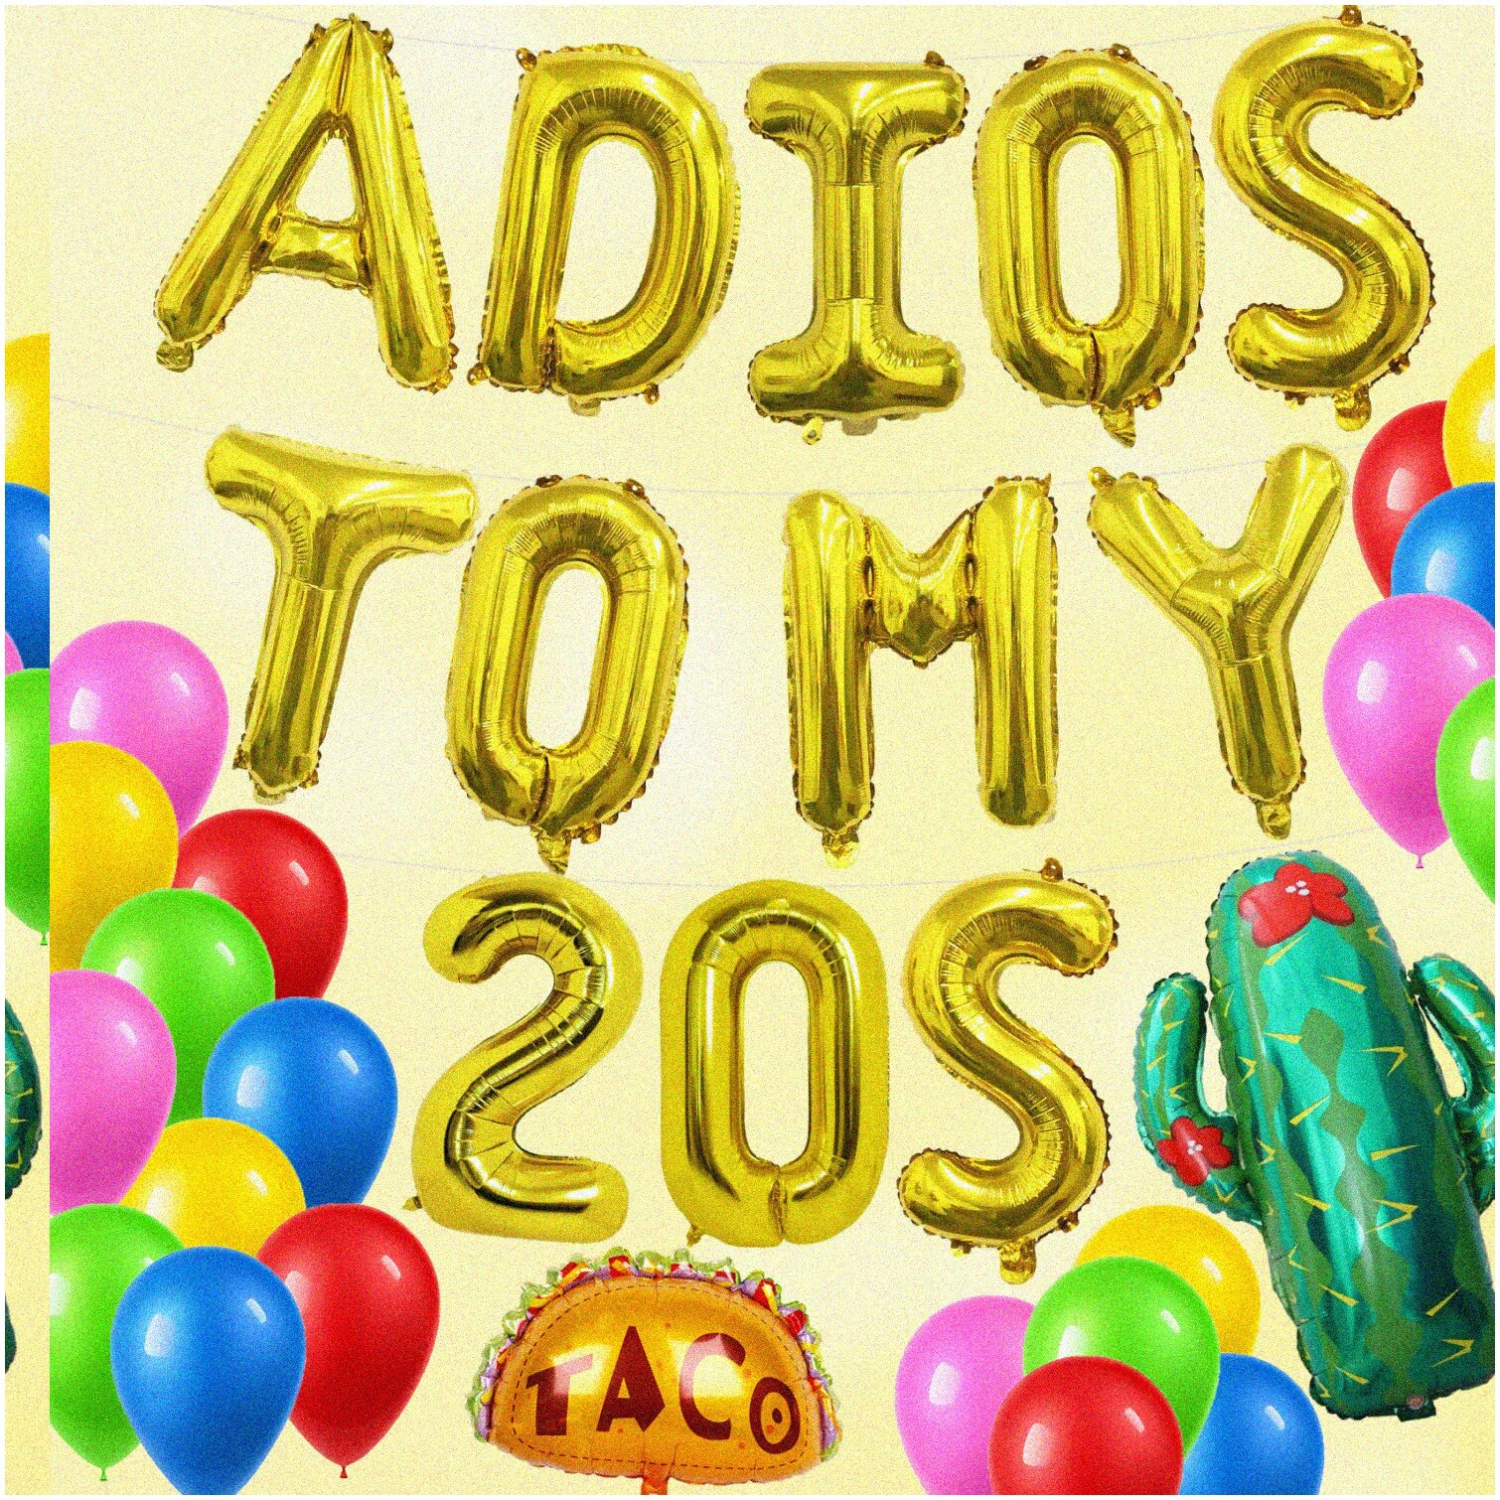 Fiesta 30th Birthday Celebration Kit - Adios To My 20s Decorations, Taco Bout 30 Balloon, Cactus Balloon, Cinco de Mayo Inspired Party Supplies